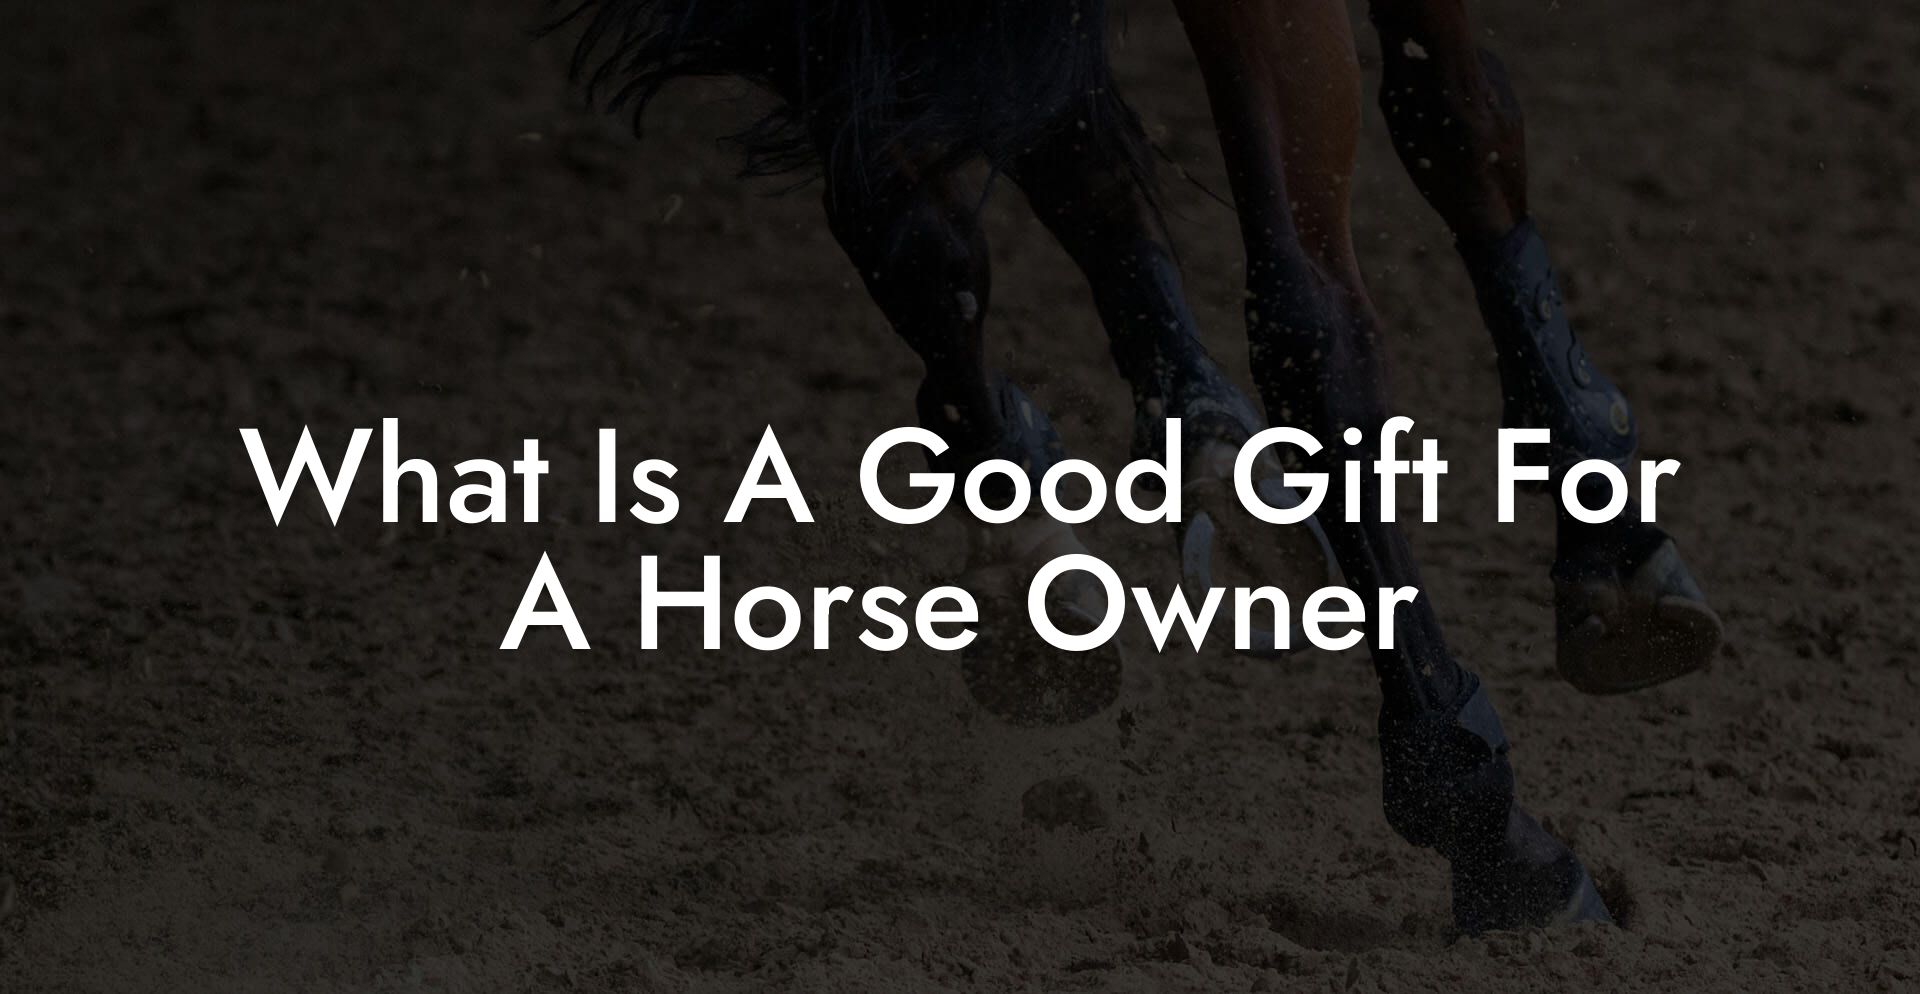 What Is A Good Gift For A Horse Owner